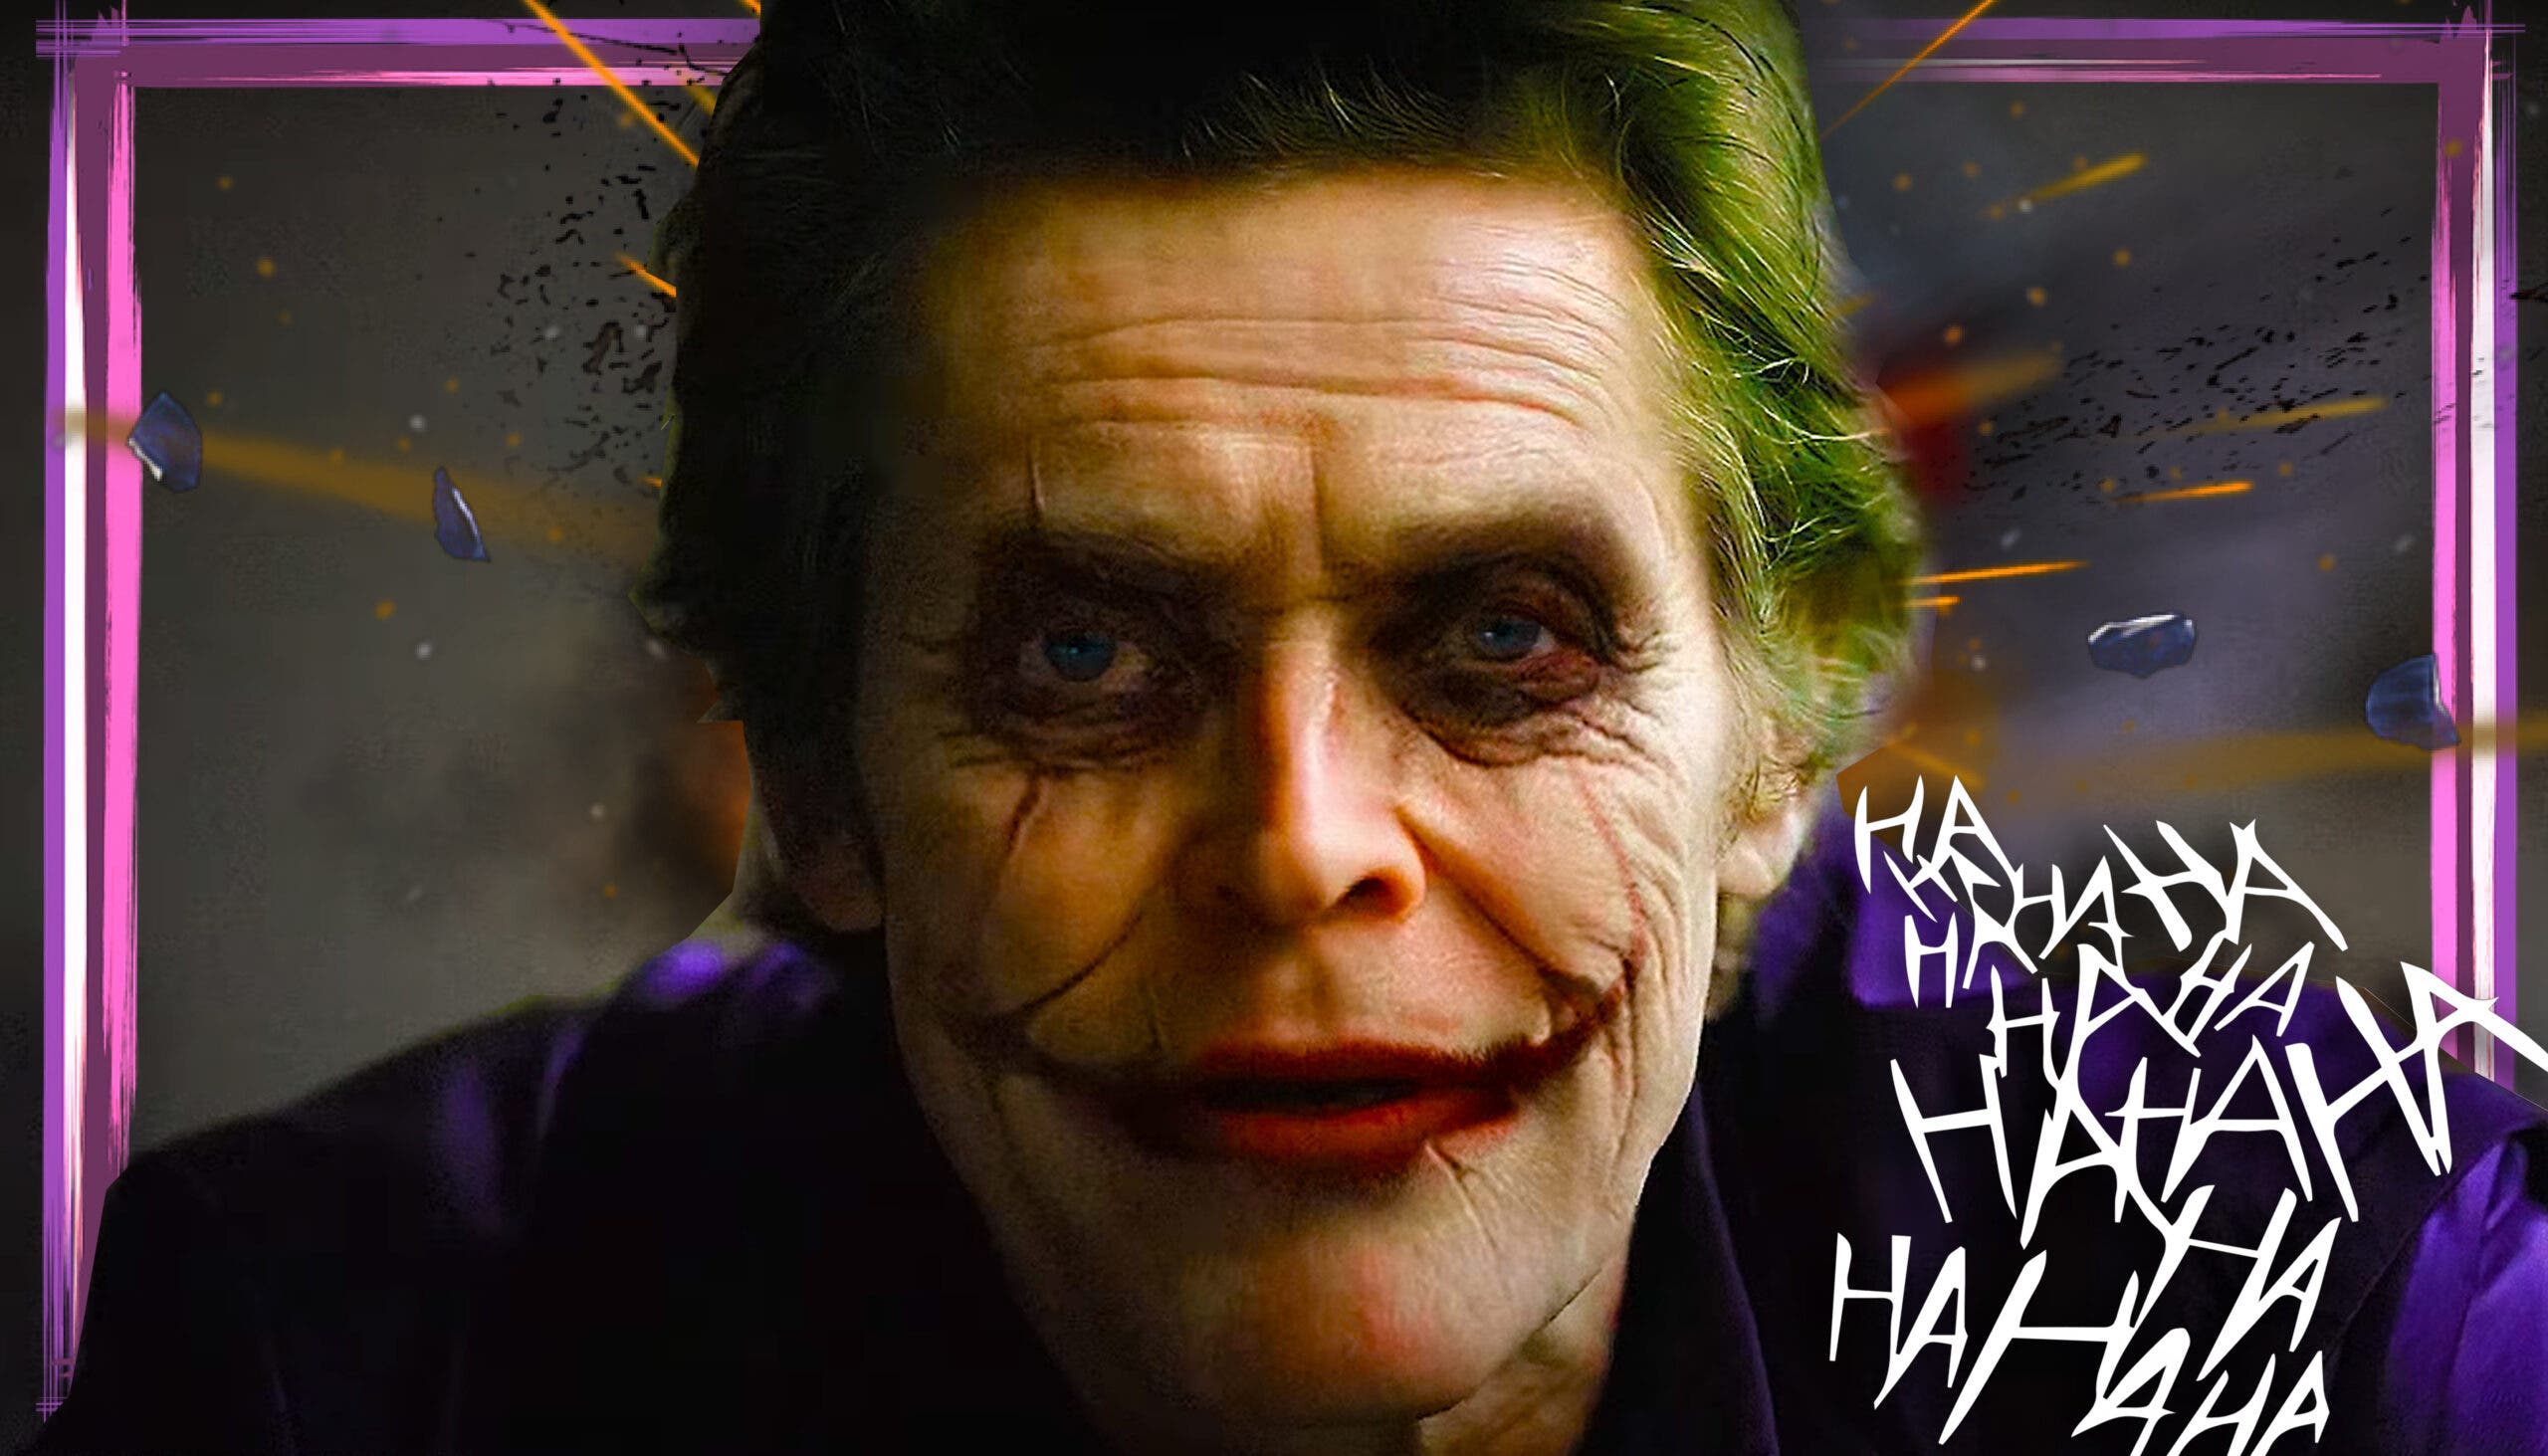 Willem Dafoe Pitched Himself Playing a "Joker Imposter" Film Aest...